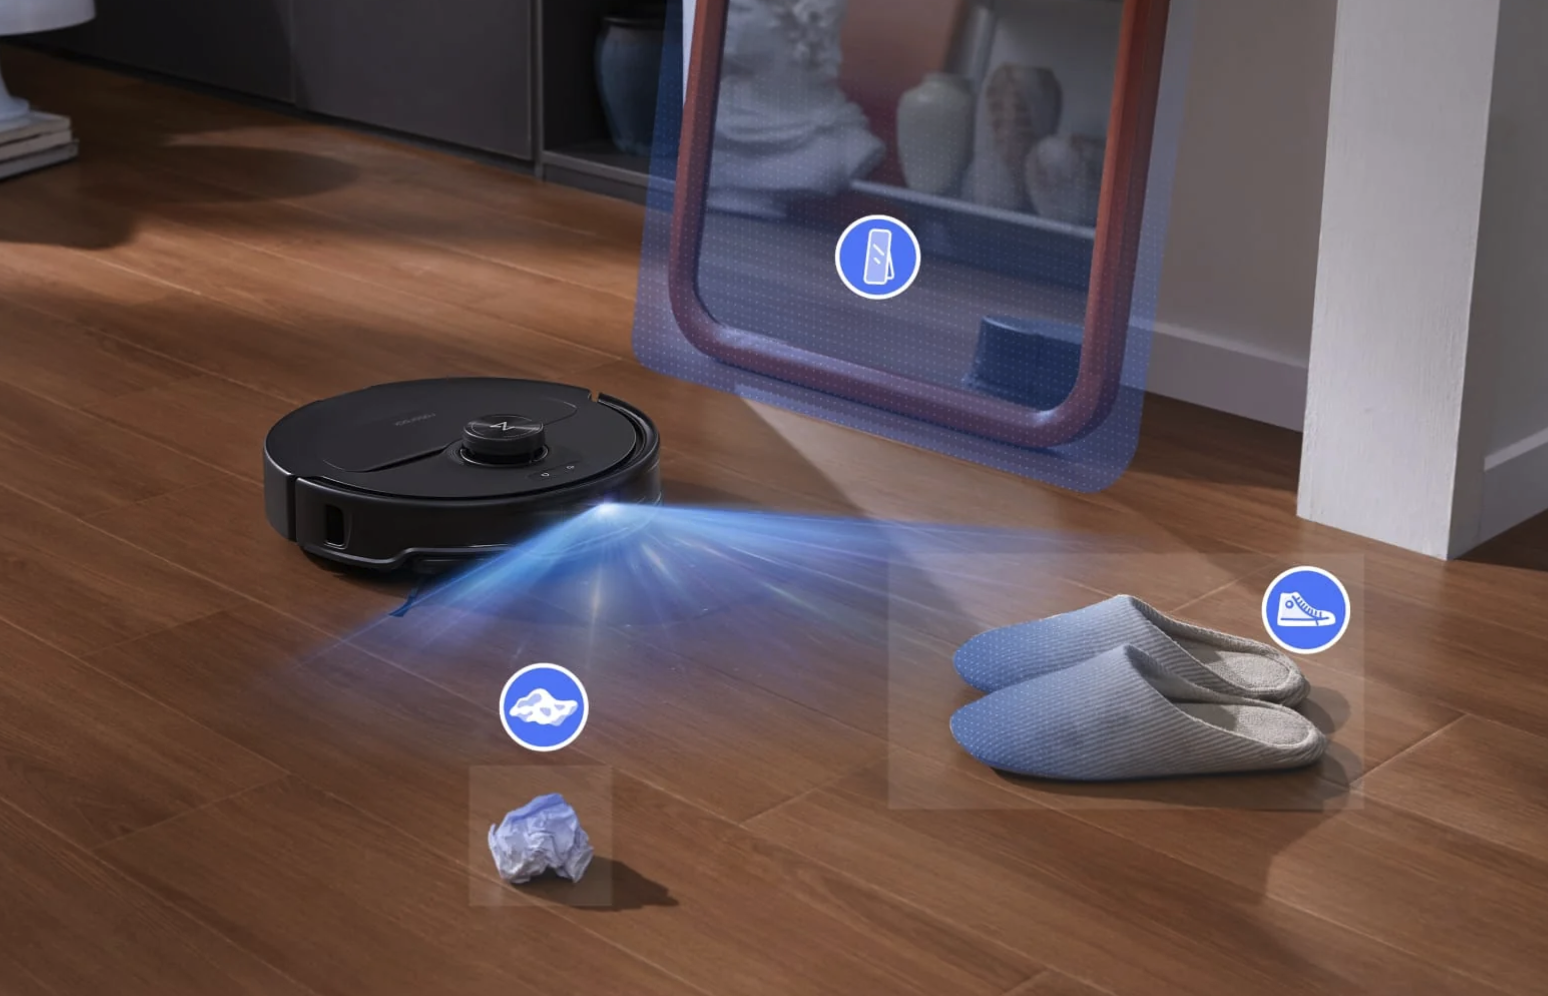 Review of the Roborock Qrevo Master: A Smart Floor Cleaning Robot